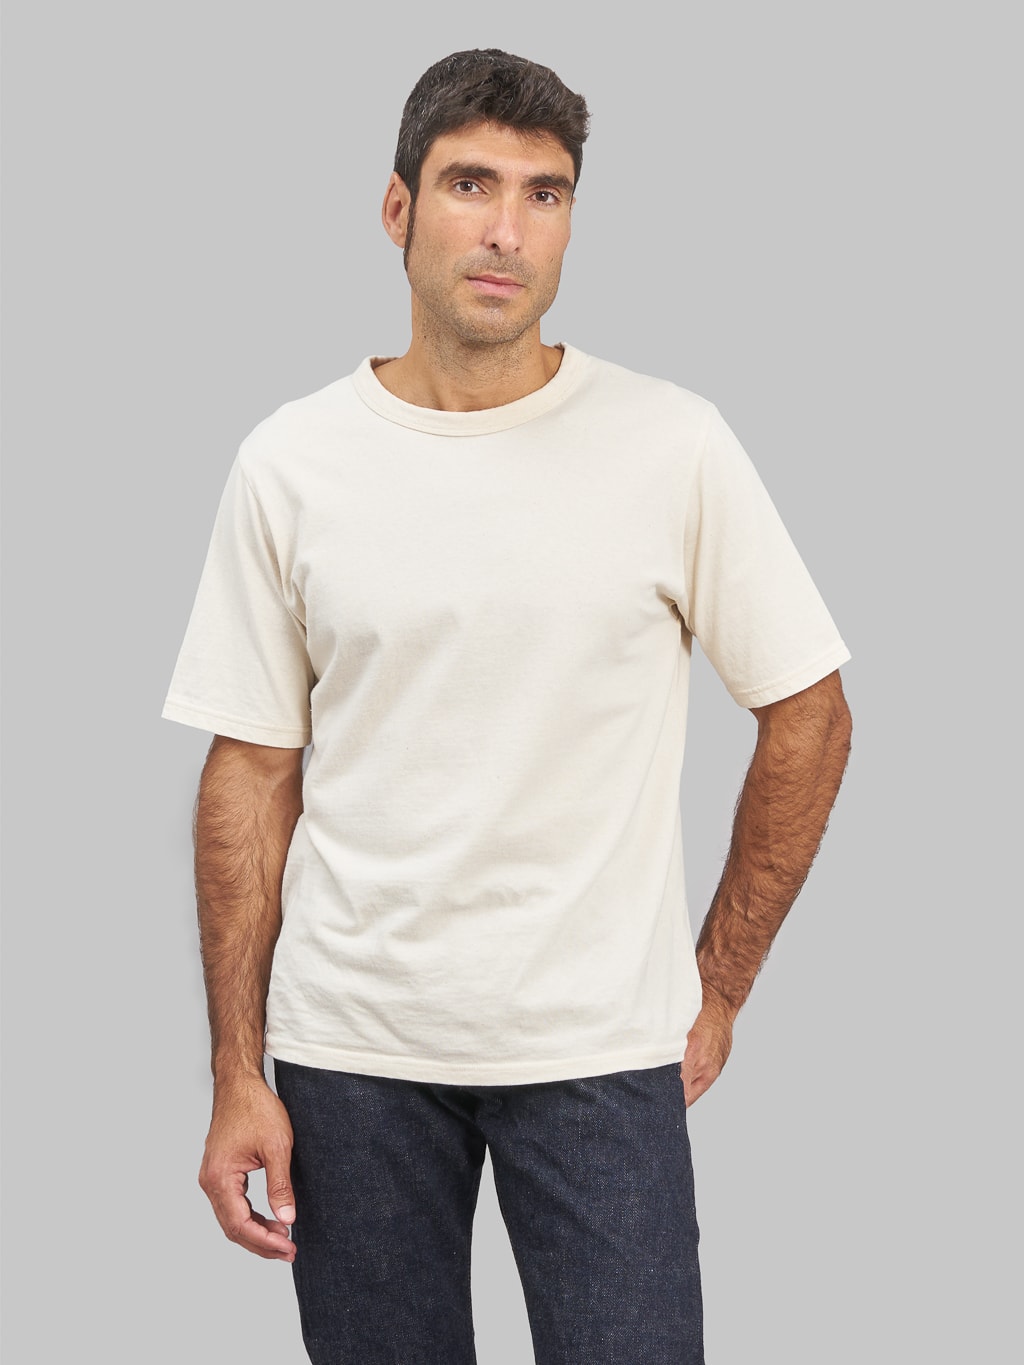 Crew Dynamic T-shirts - Egyptian Cotton Products